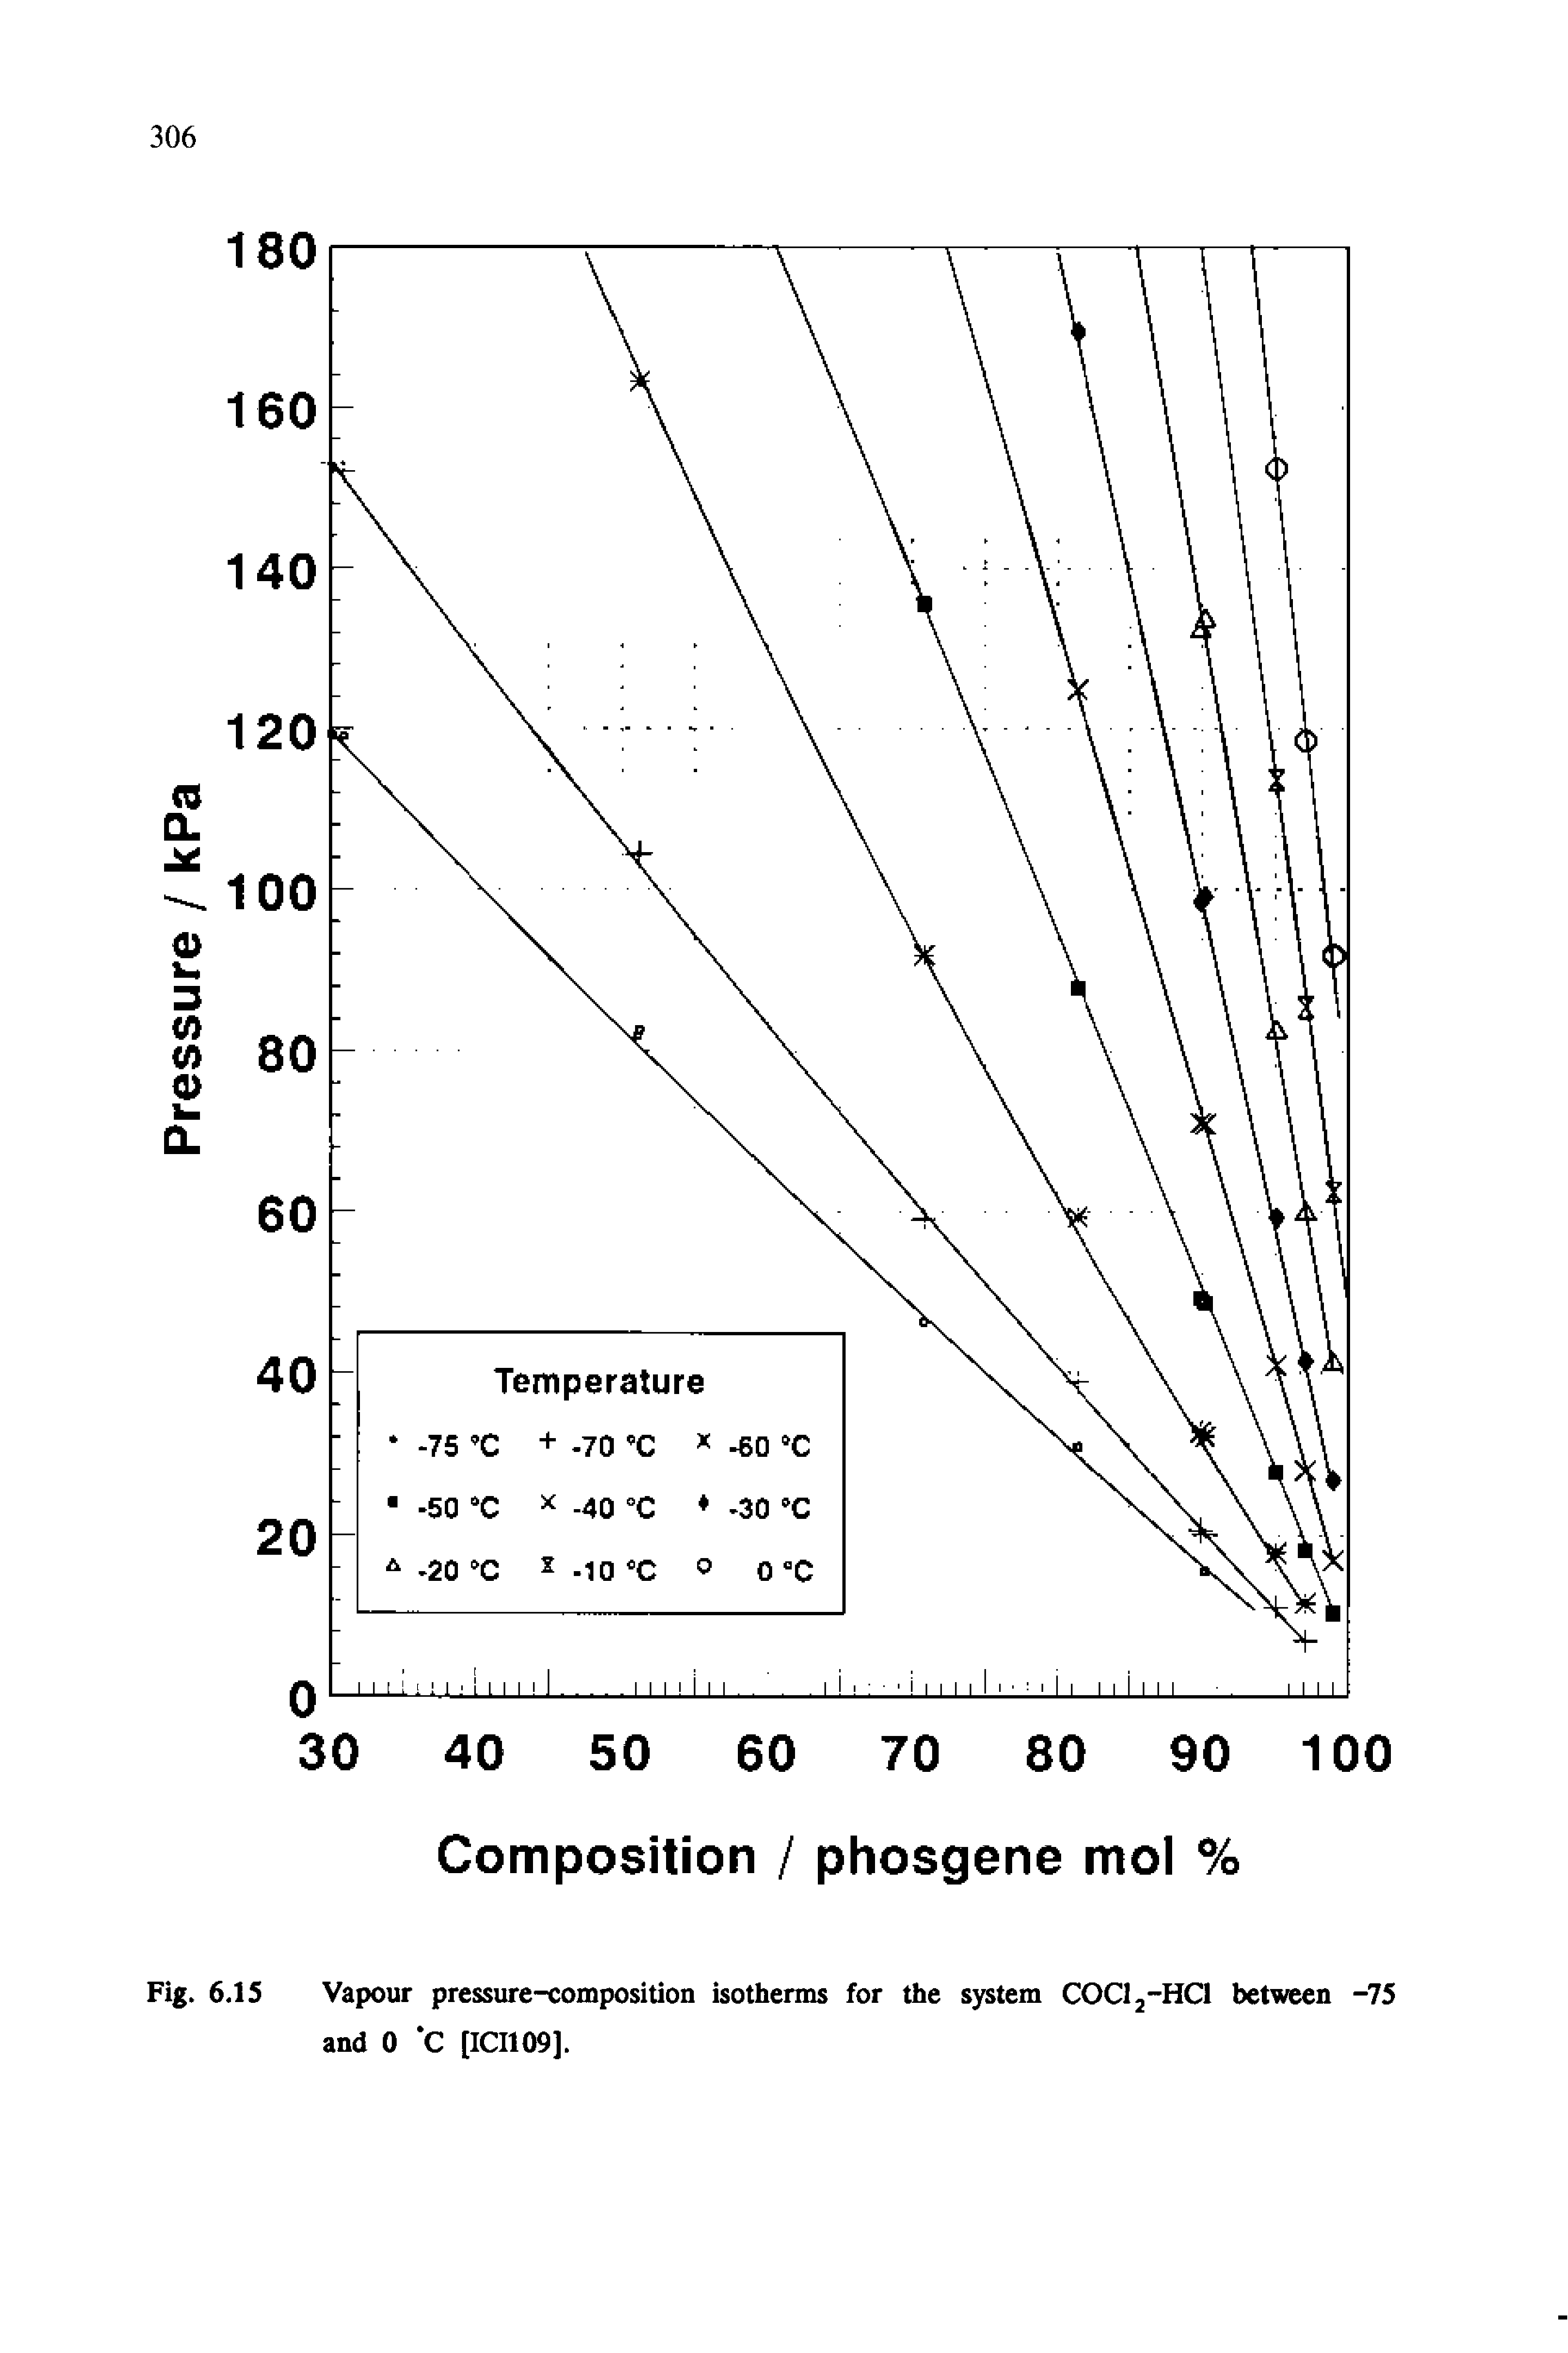 Fig. 6.15 Vapour pressure-composition isotherms for the system COClj-HCl between -75 and 0 C [ICI109].